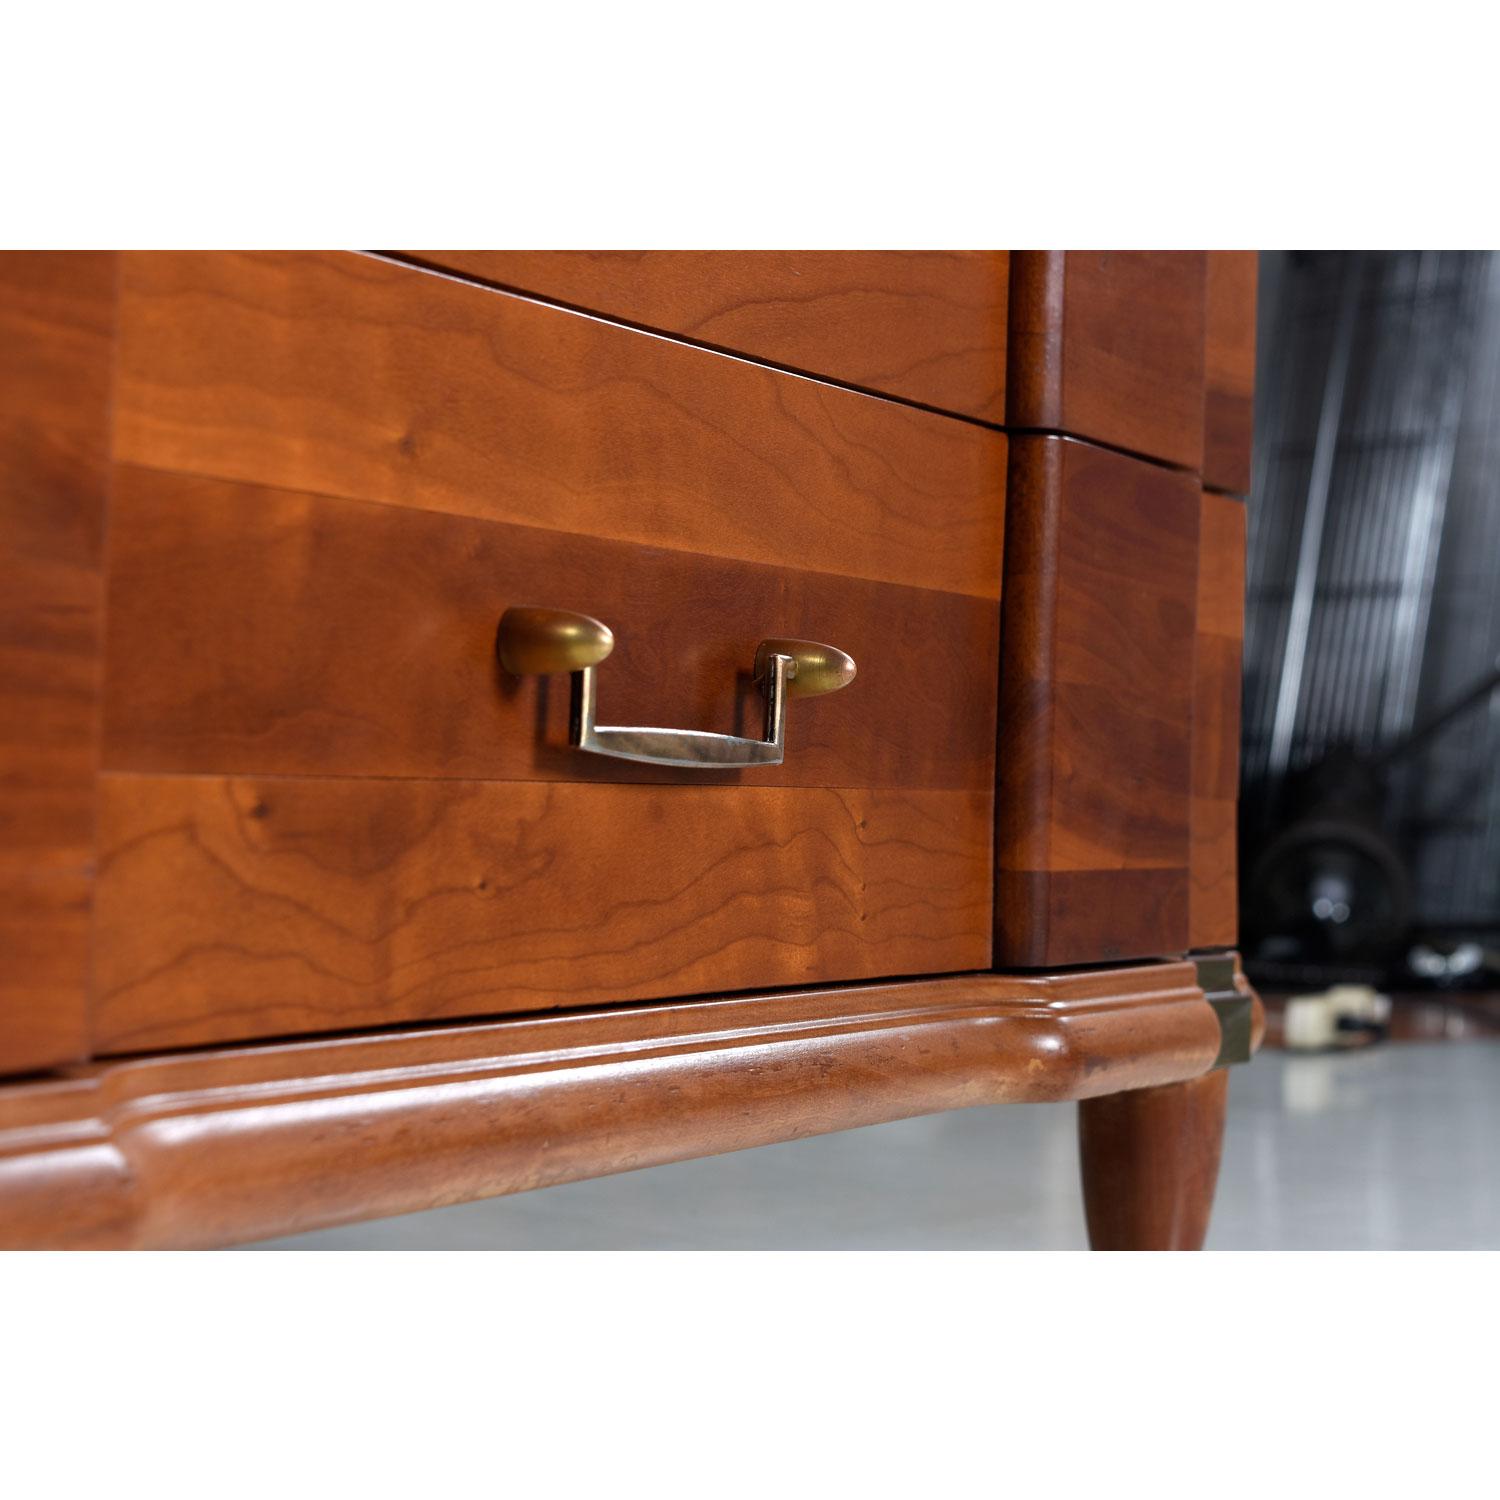 Metal Cherry Bachelors Chest by Hickory MFG with Brass Bullet Shaped Handles